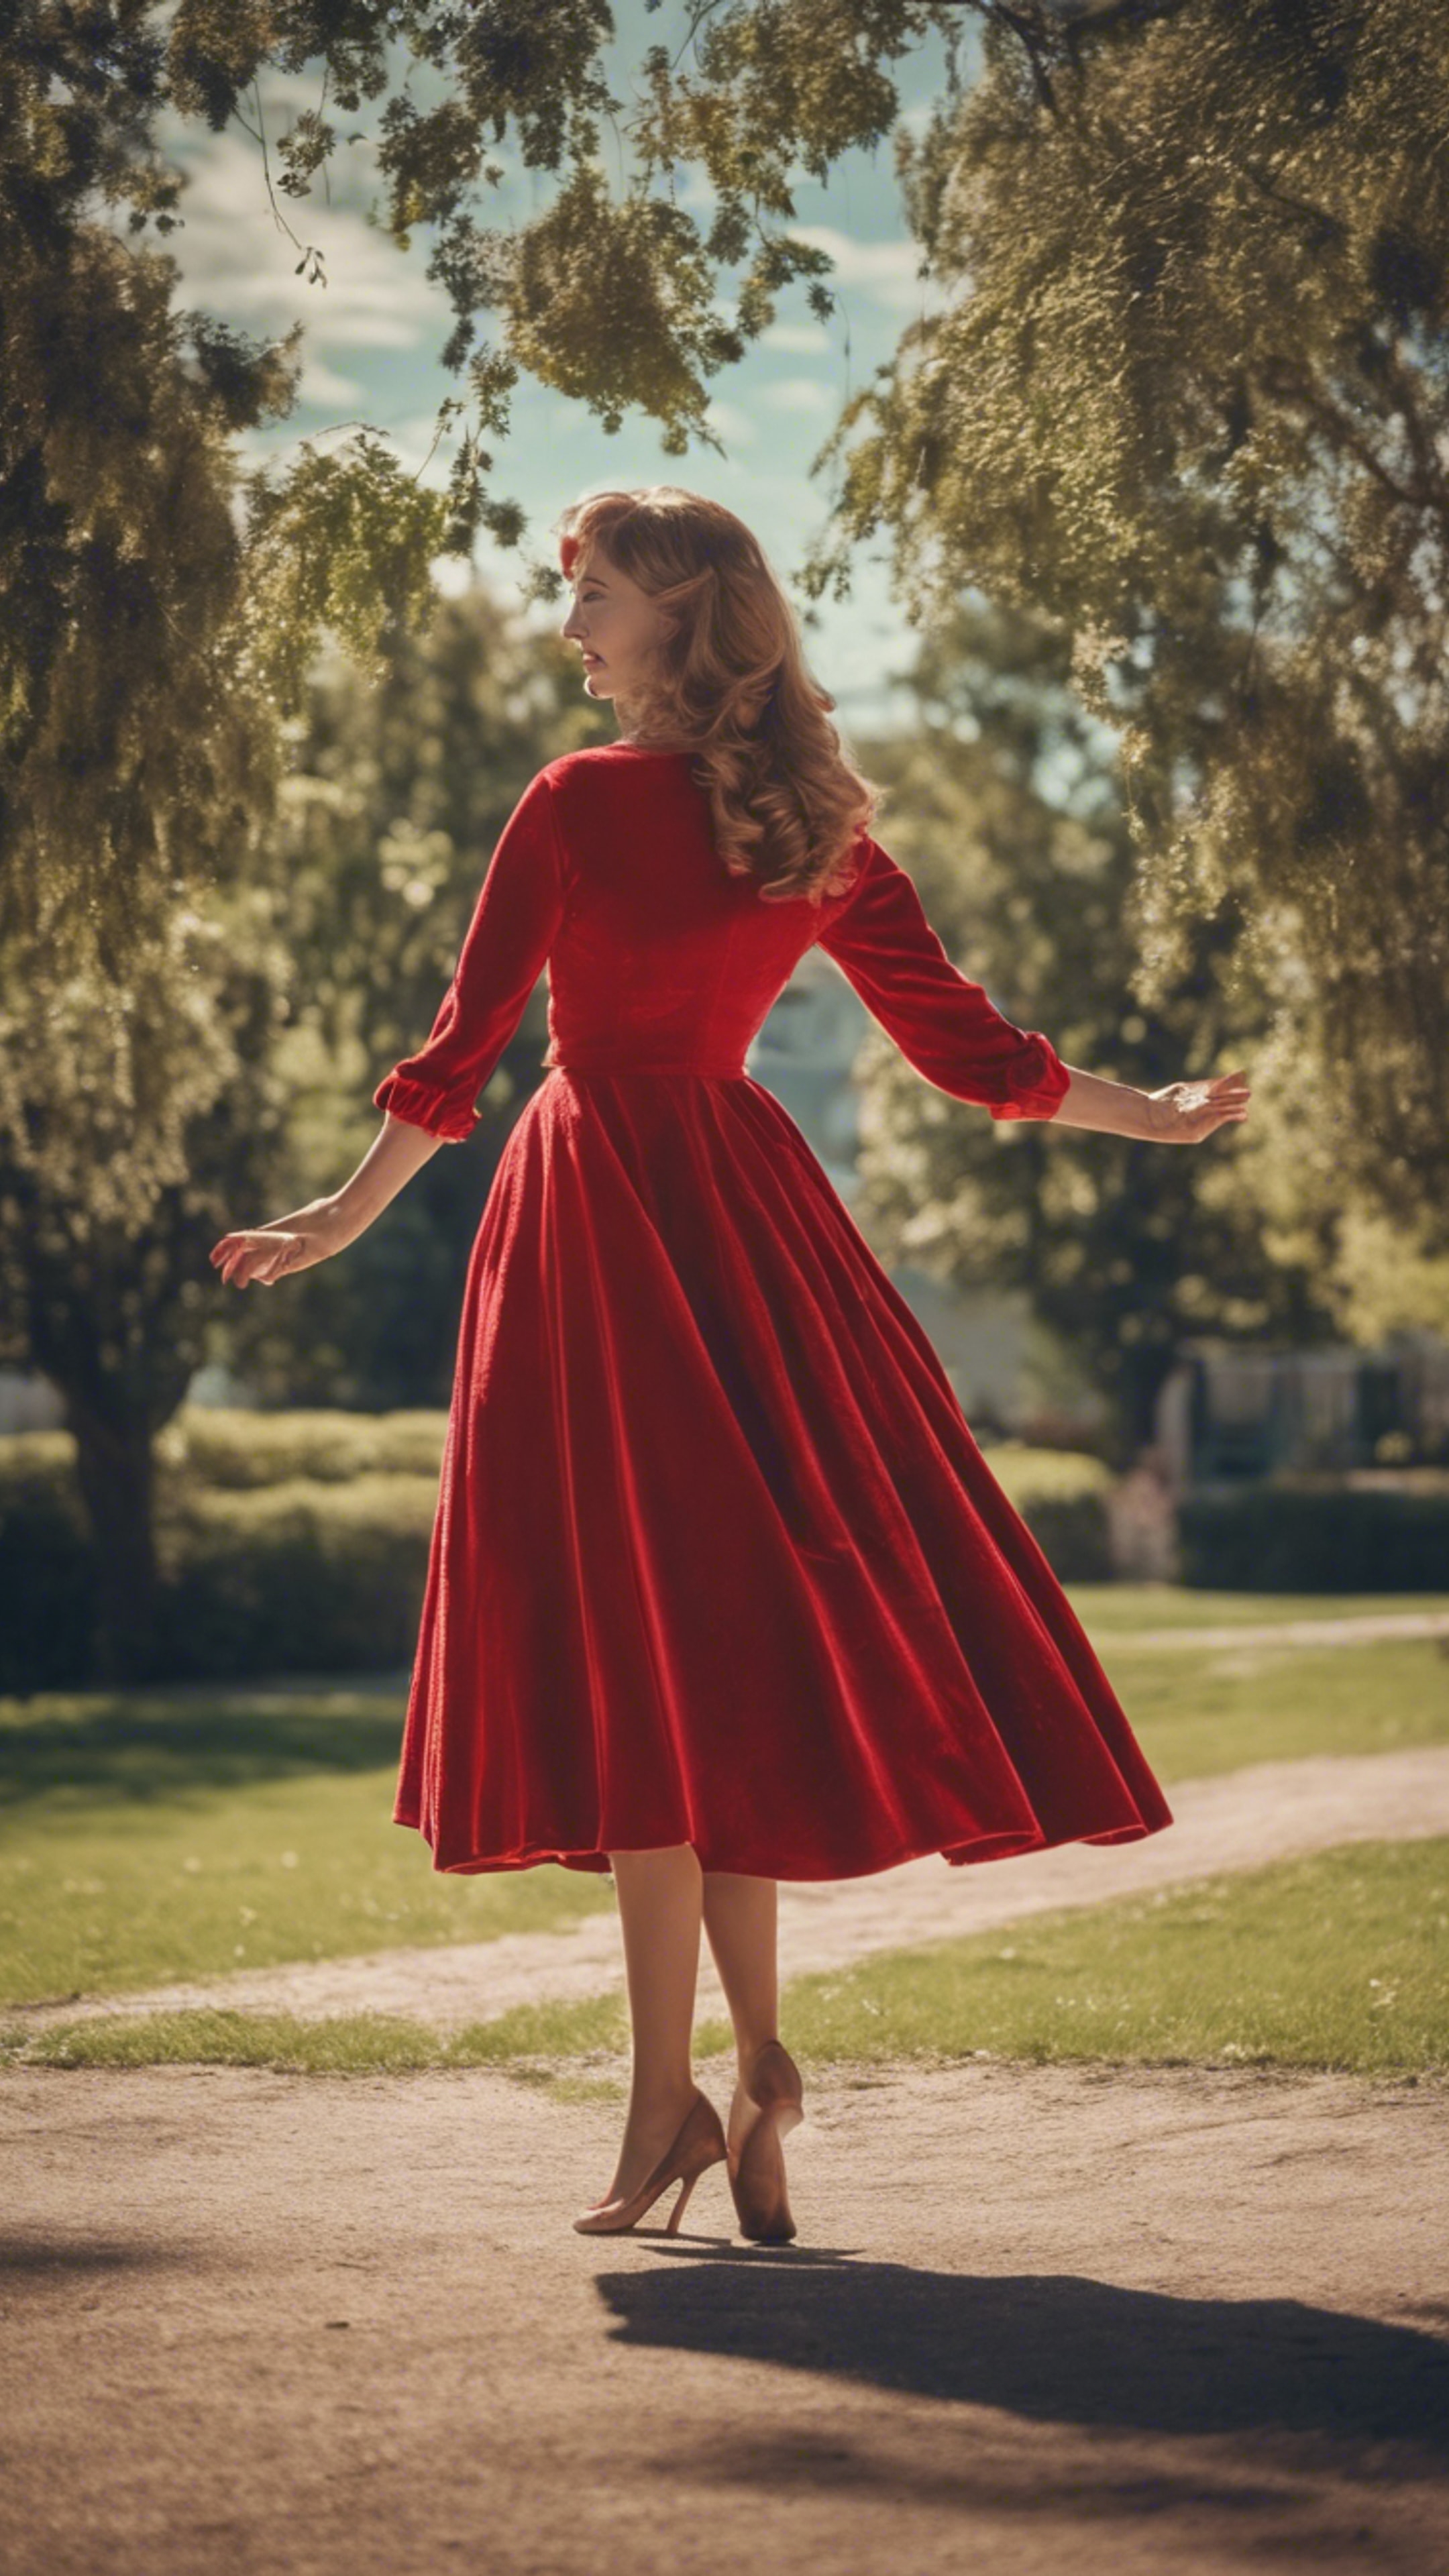 A red velvet swing dress from the 1950s, dancing in the wind on a sunny day.壁紙[698c6881b2664684a2ce]